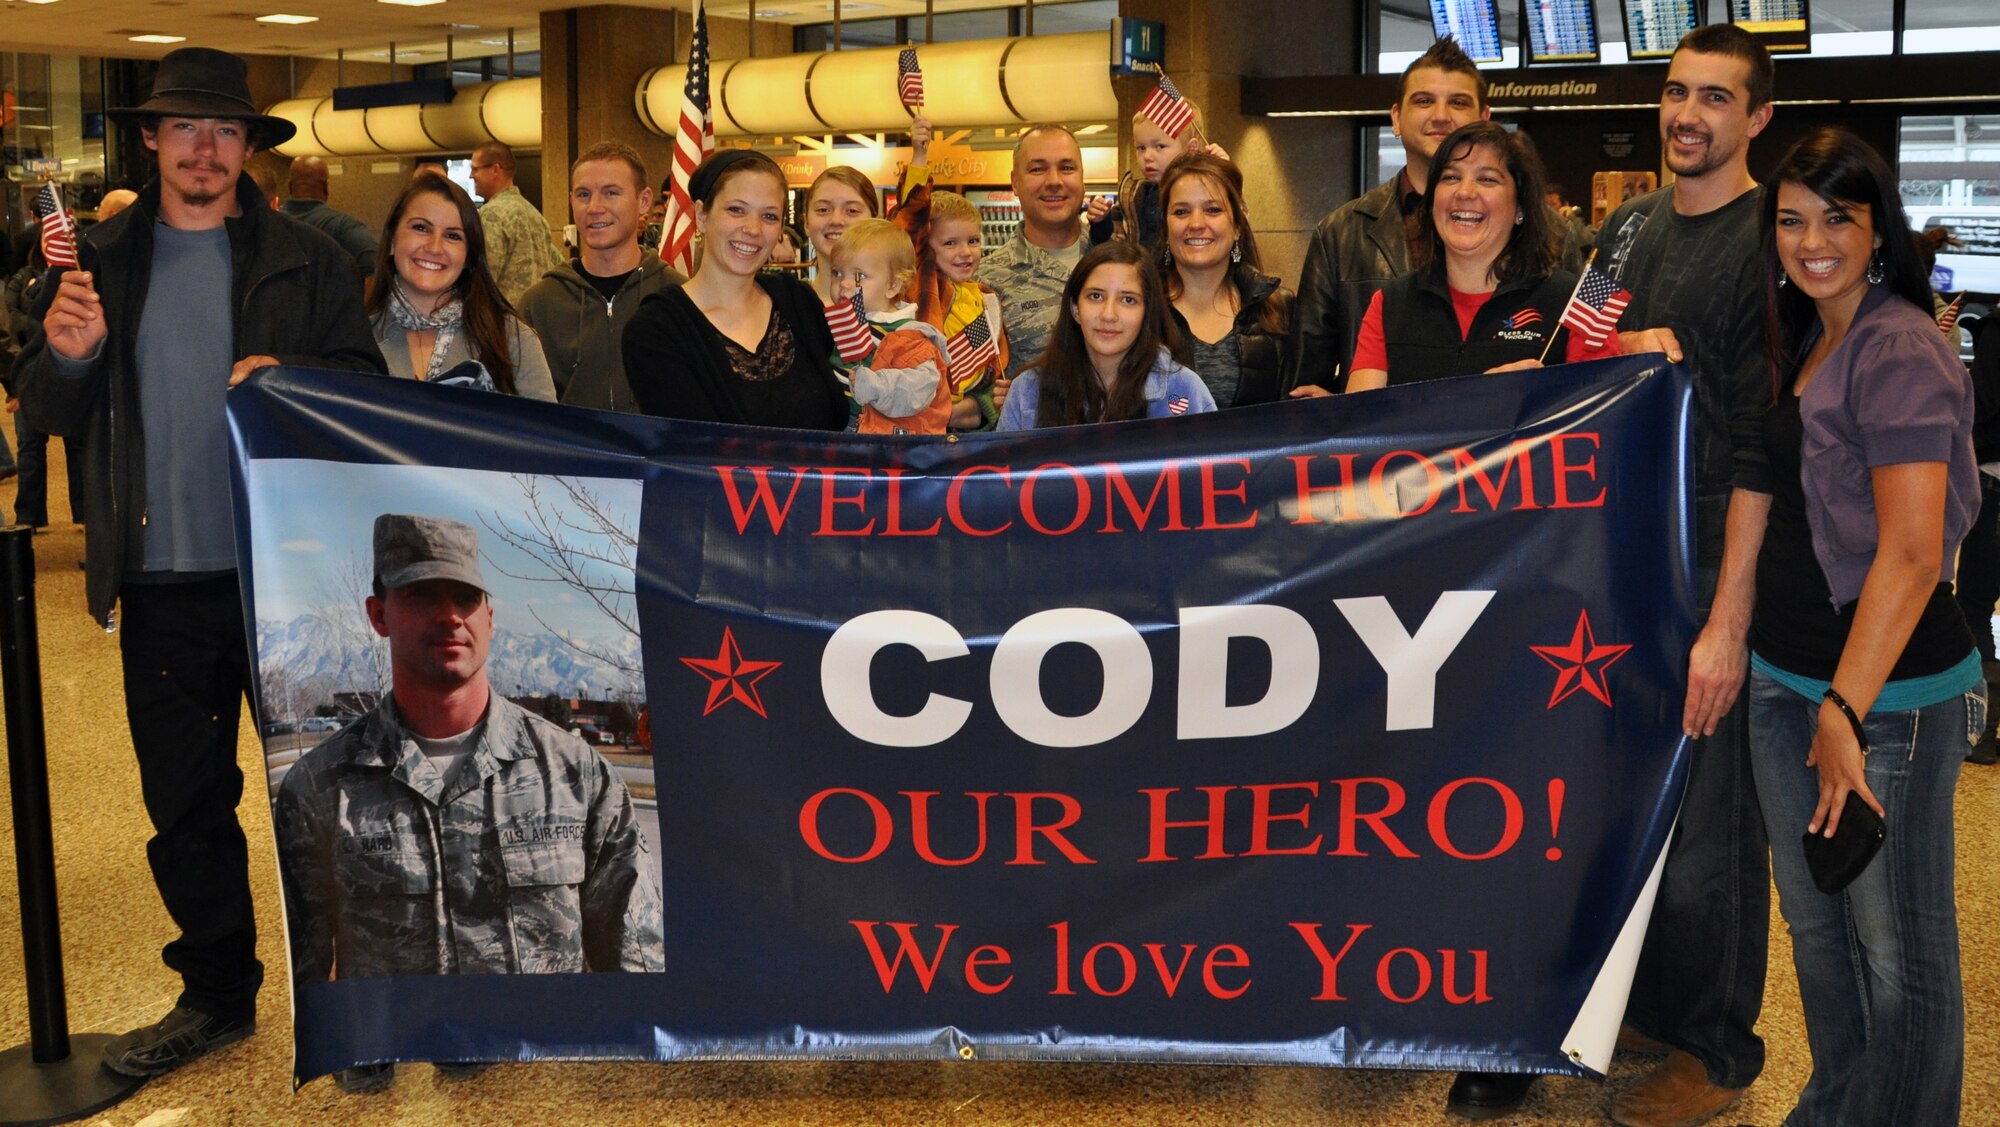 Family and friends waited to welcome home Senior Airman Cody Hard as he returned from deployment at the Salt Lake City International Airport, Nov. 16. Hard and eleven other members of the 130th Engineering Installation Squadron served a six-month deployment in support of Operation Enduring Freedom throughout several forward operating bases in Afghanistan. (U.S. Air Force photo courtesy Staff Sgt. Ashlee Hood)(RELEASED)